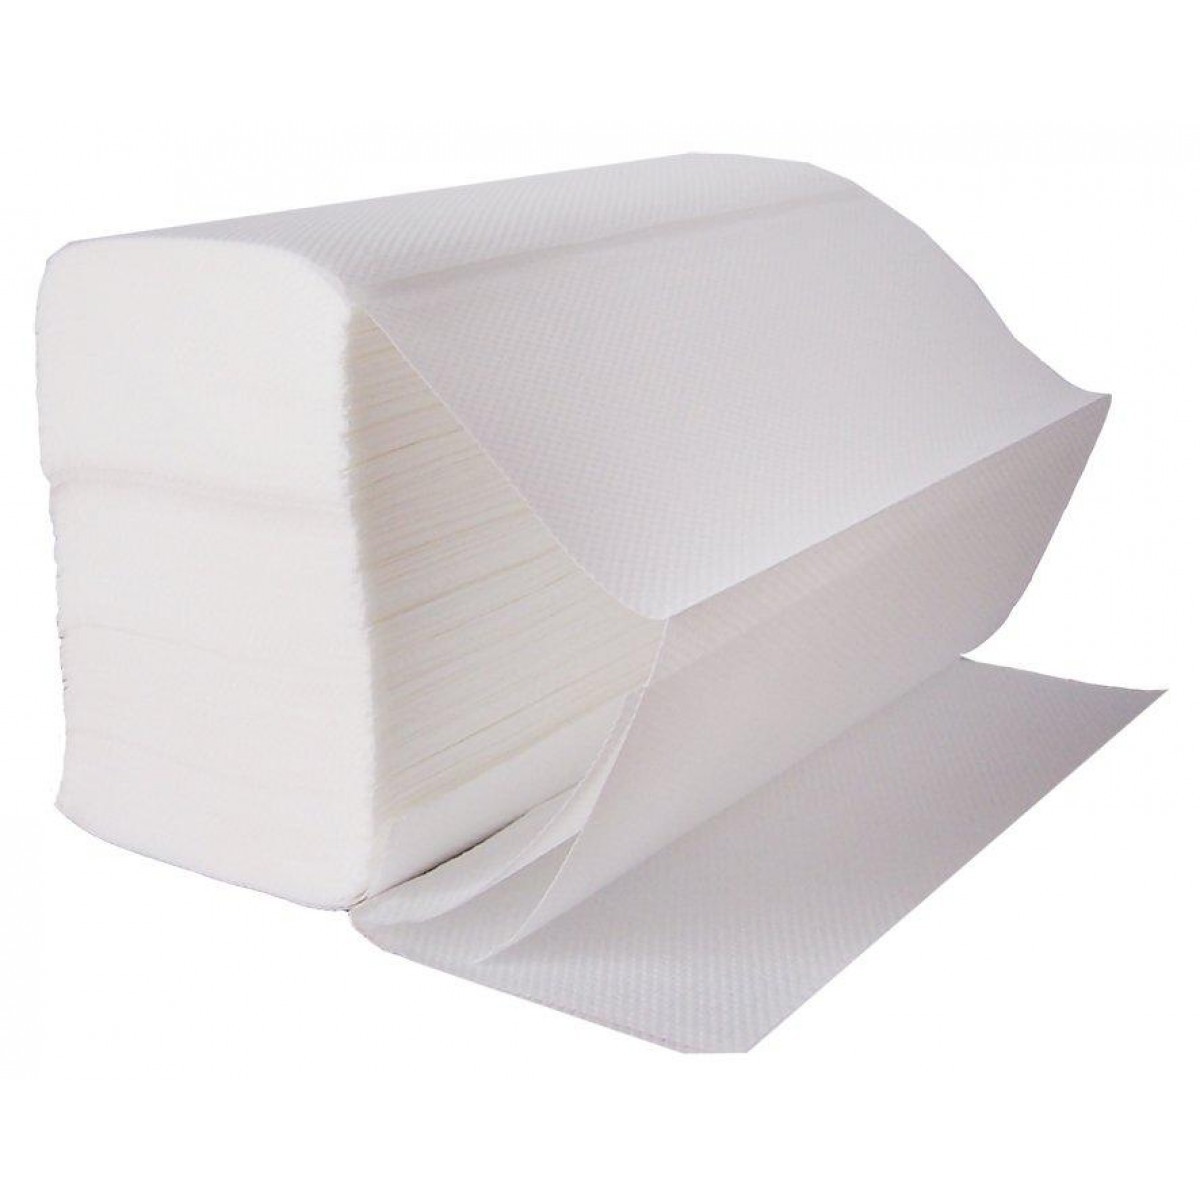 3000 White 2 Ply Soft & Ultra Absorbent Z-Fold Hand Towel 240mm x235mm 